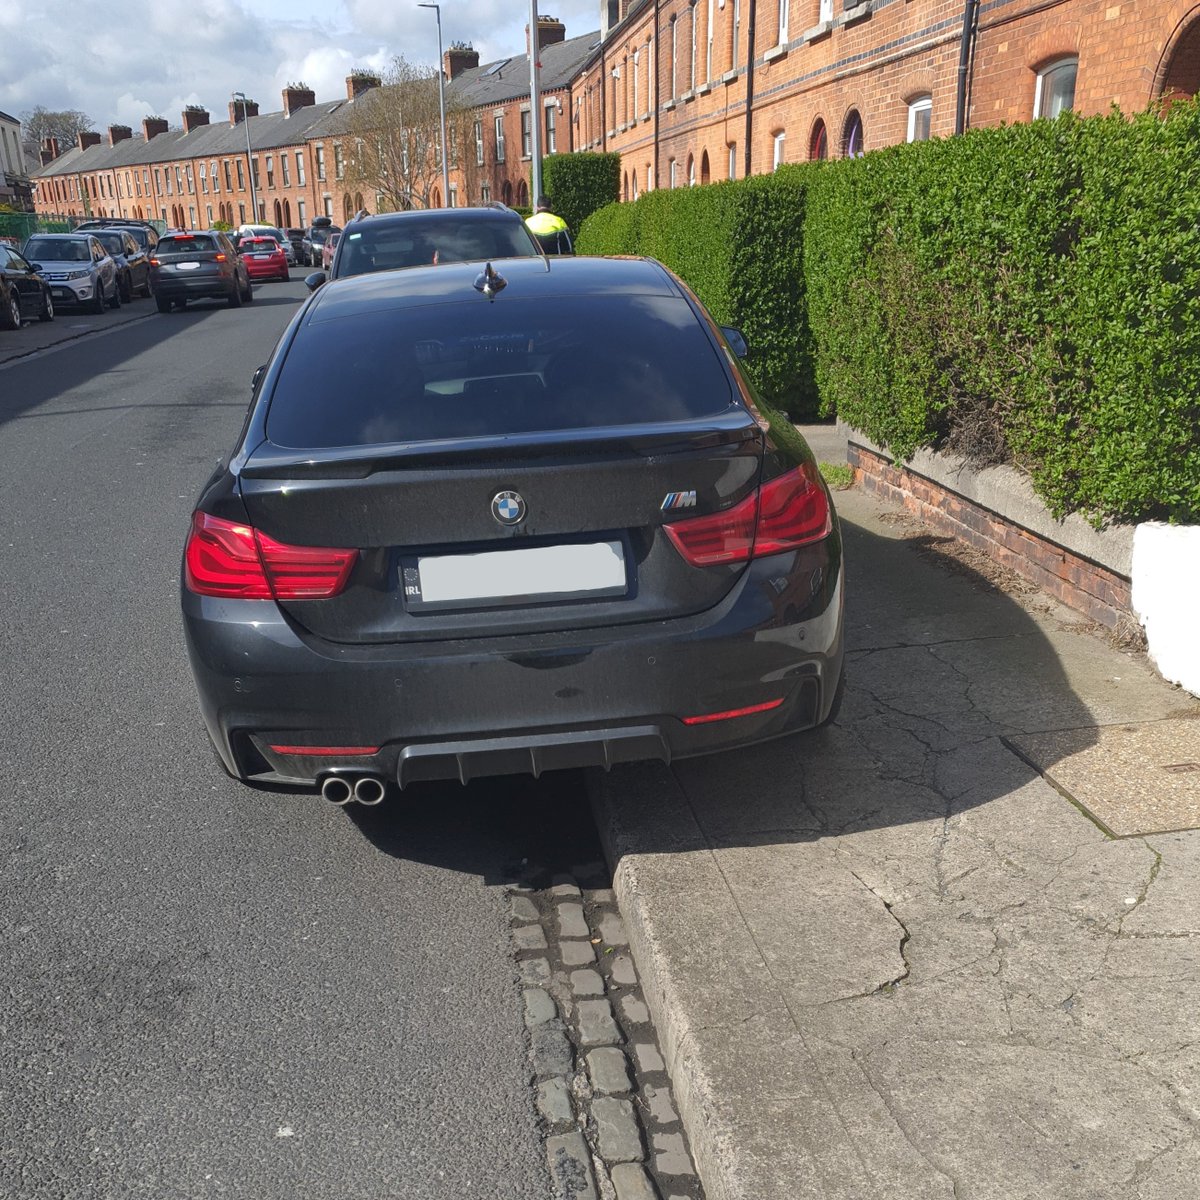 Our North Central Roads Policing Unit issued a number of fixed charge notices to illegally parked vehicles in the Drumcondra area yesterday.

#ItsAJobWorthDoing